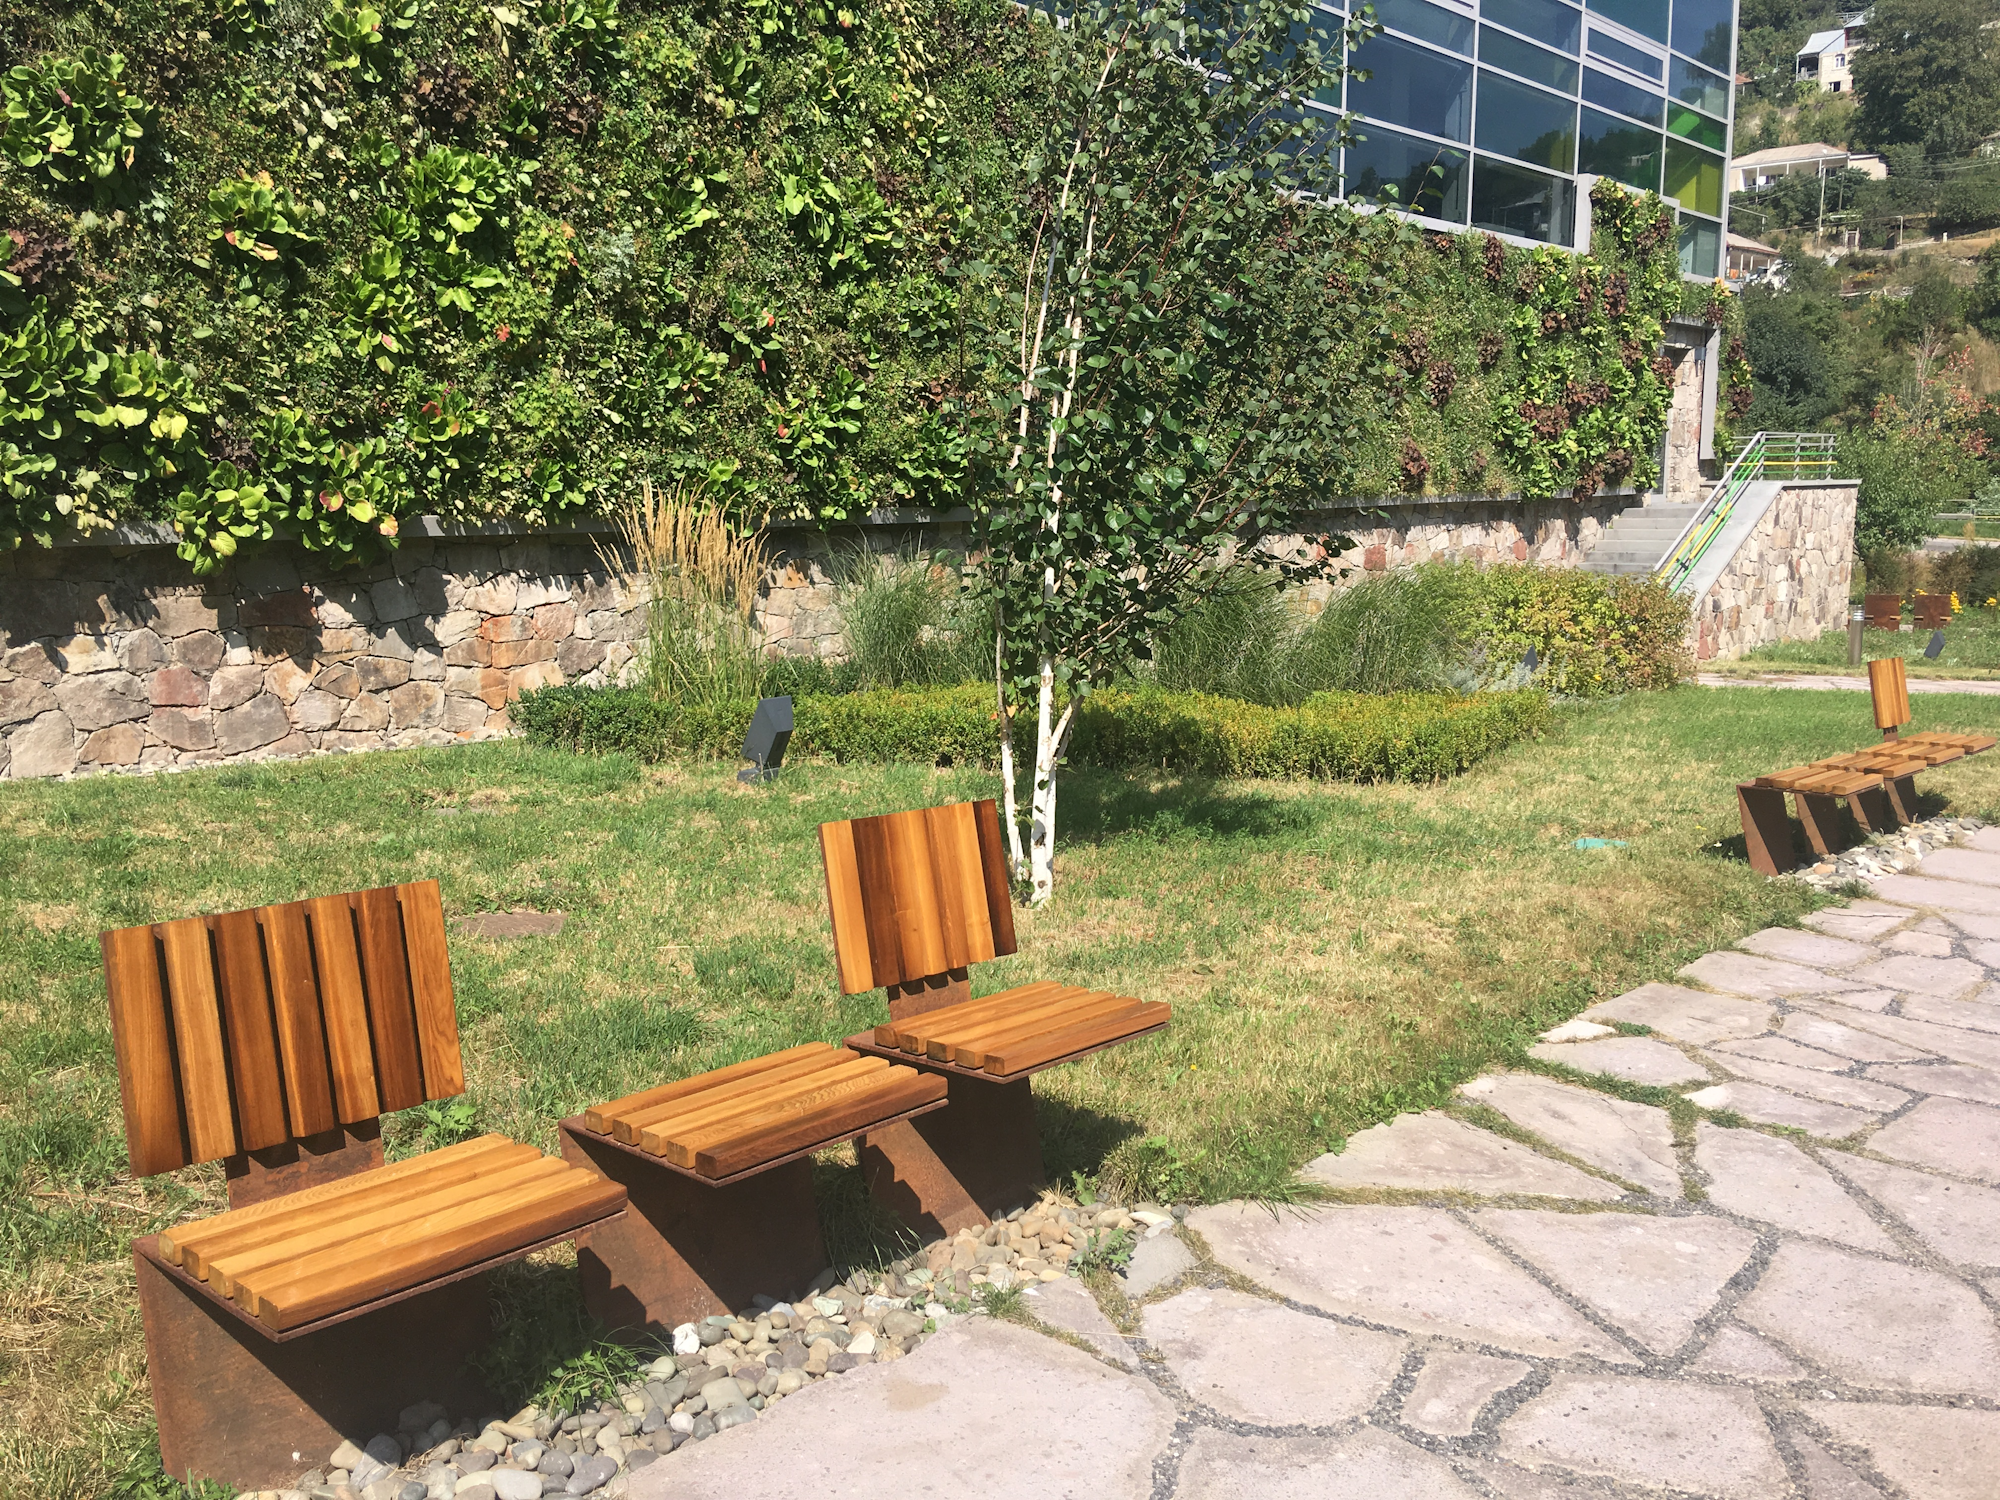 Dilijan International School In Armenia With Living Walls  Next To Seating Area